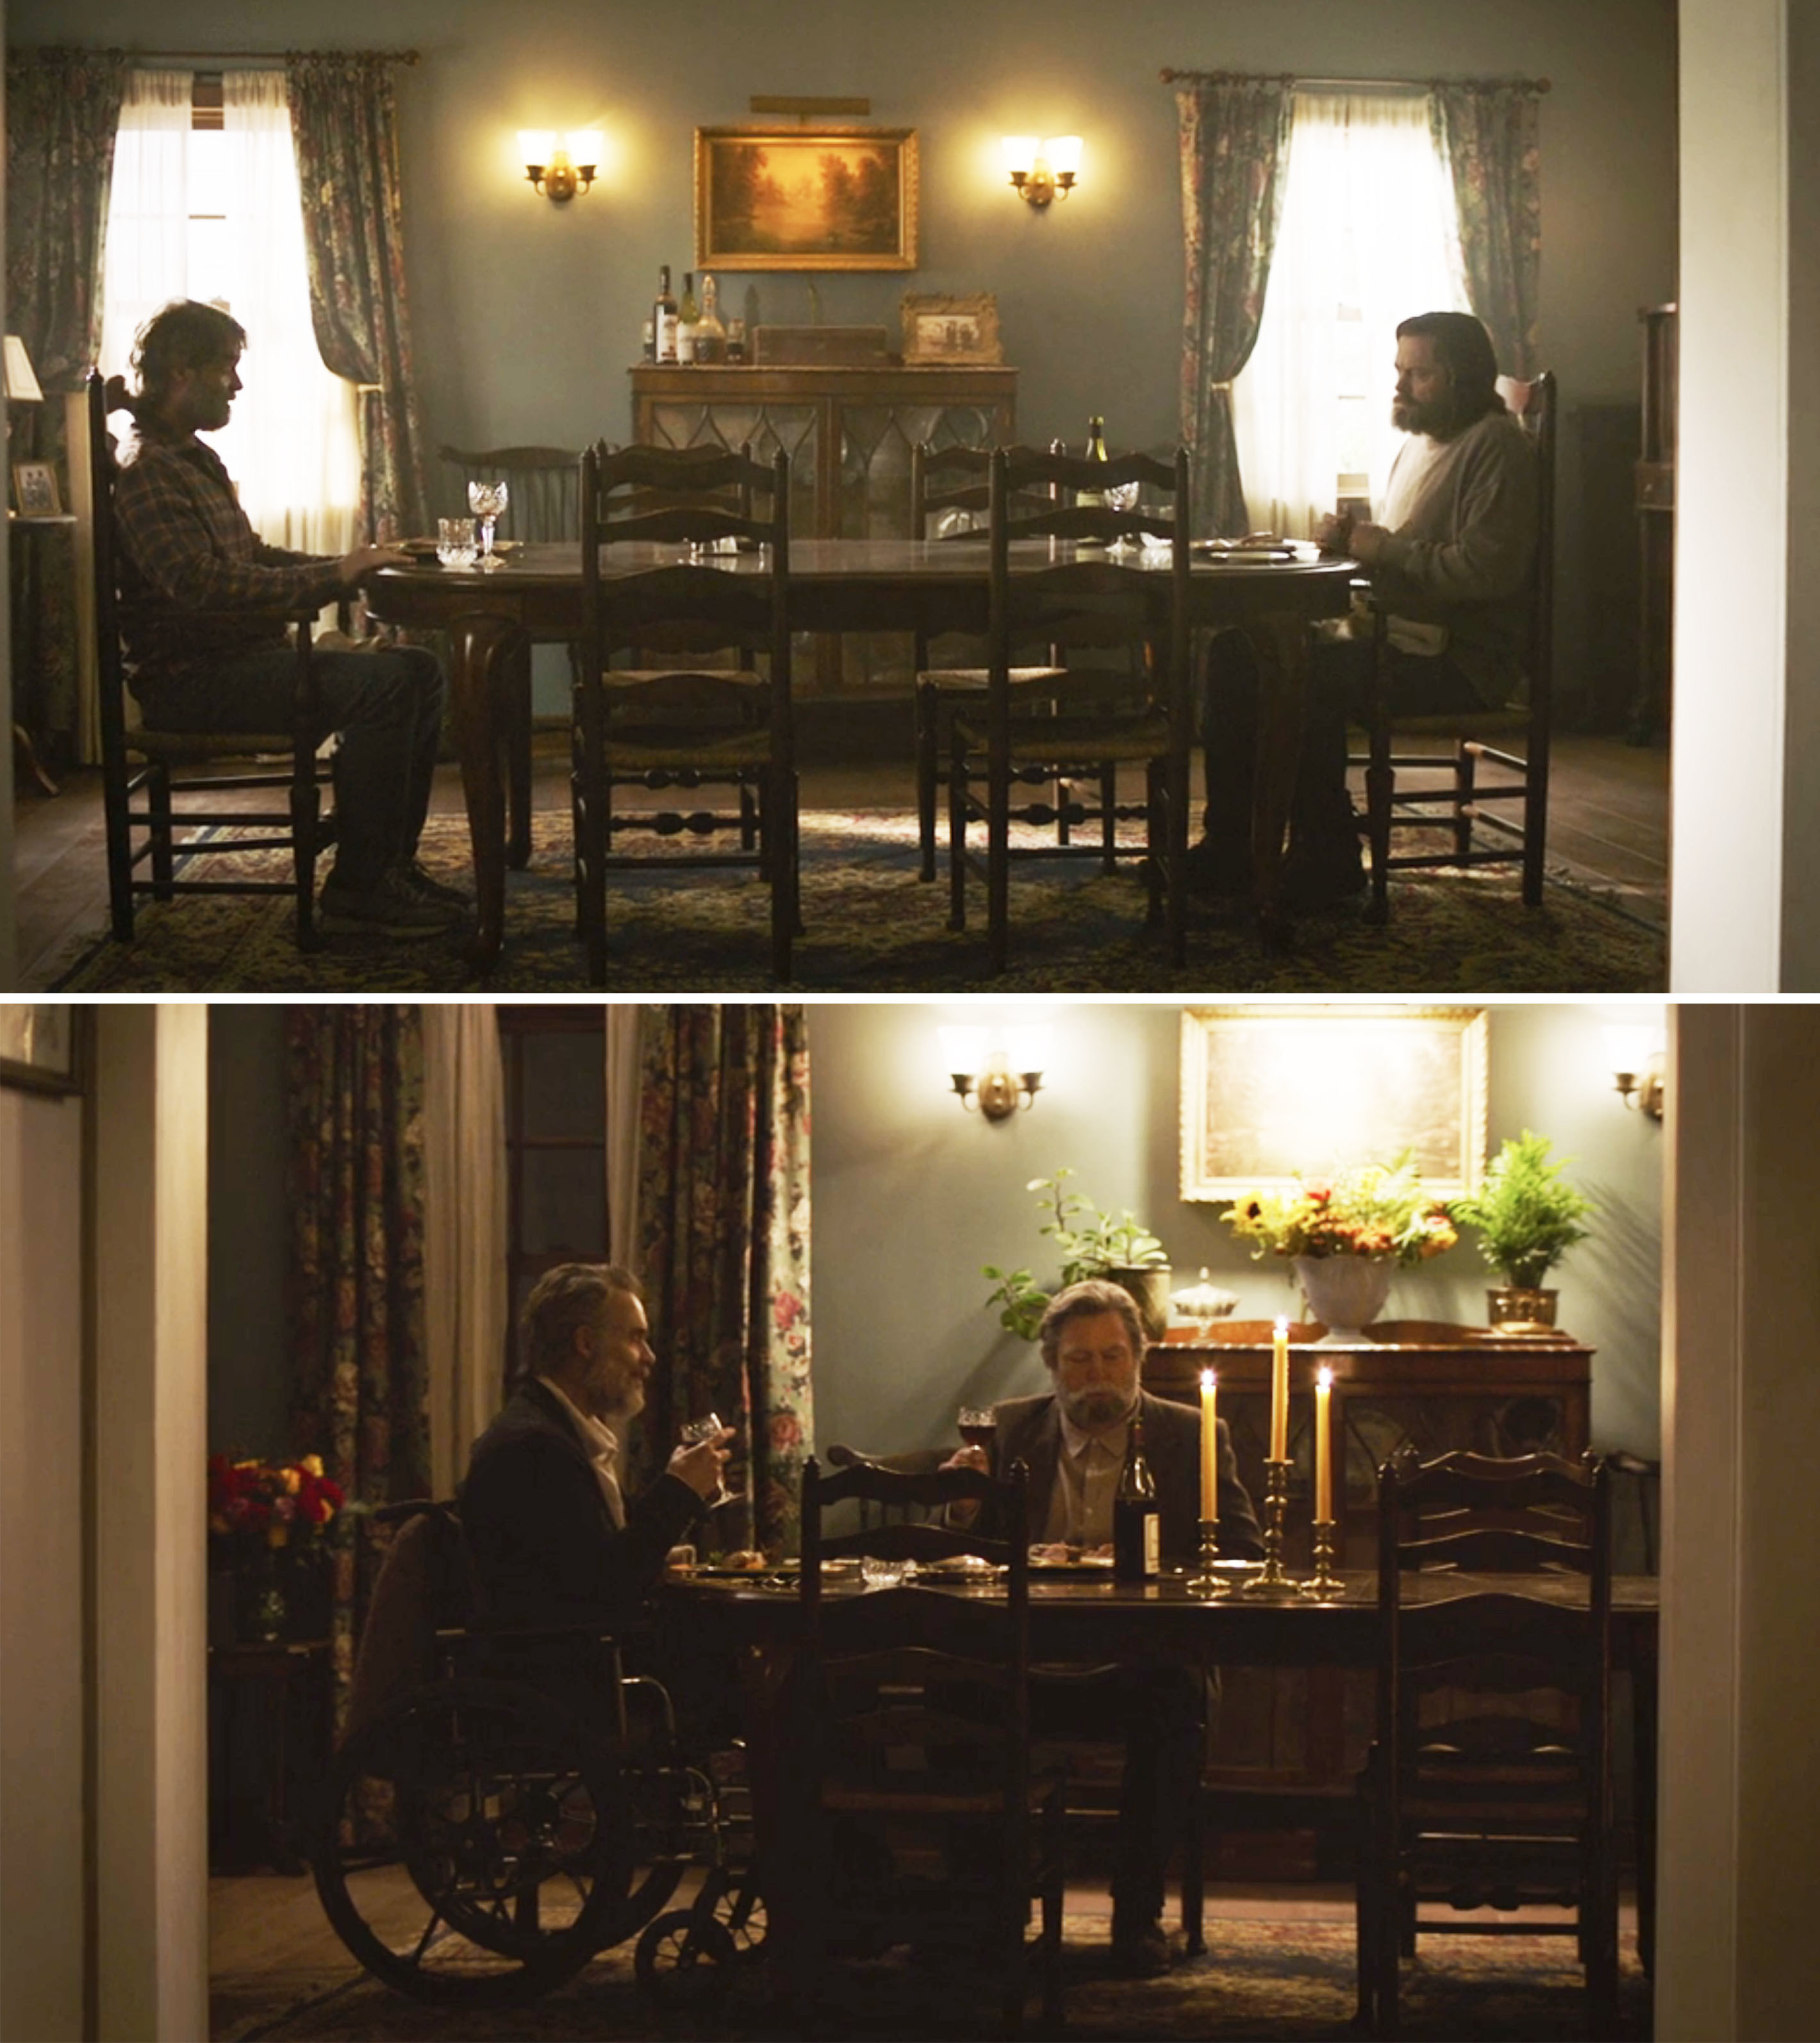 Bill and Frank sitting across from each other vs next to each other